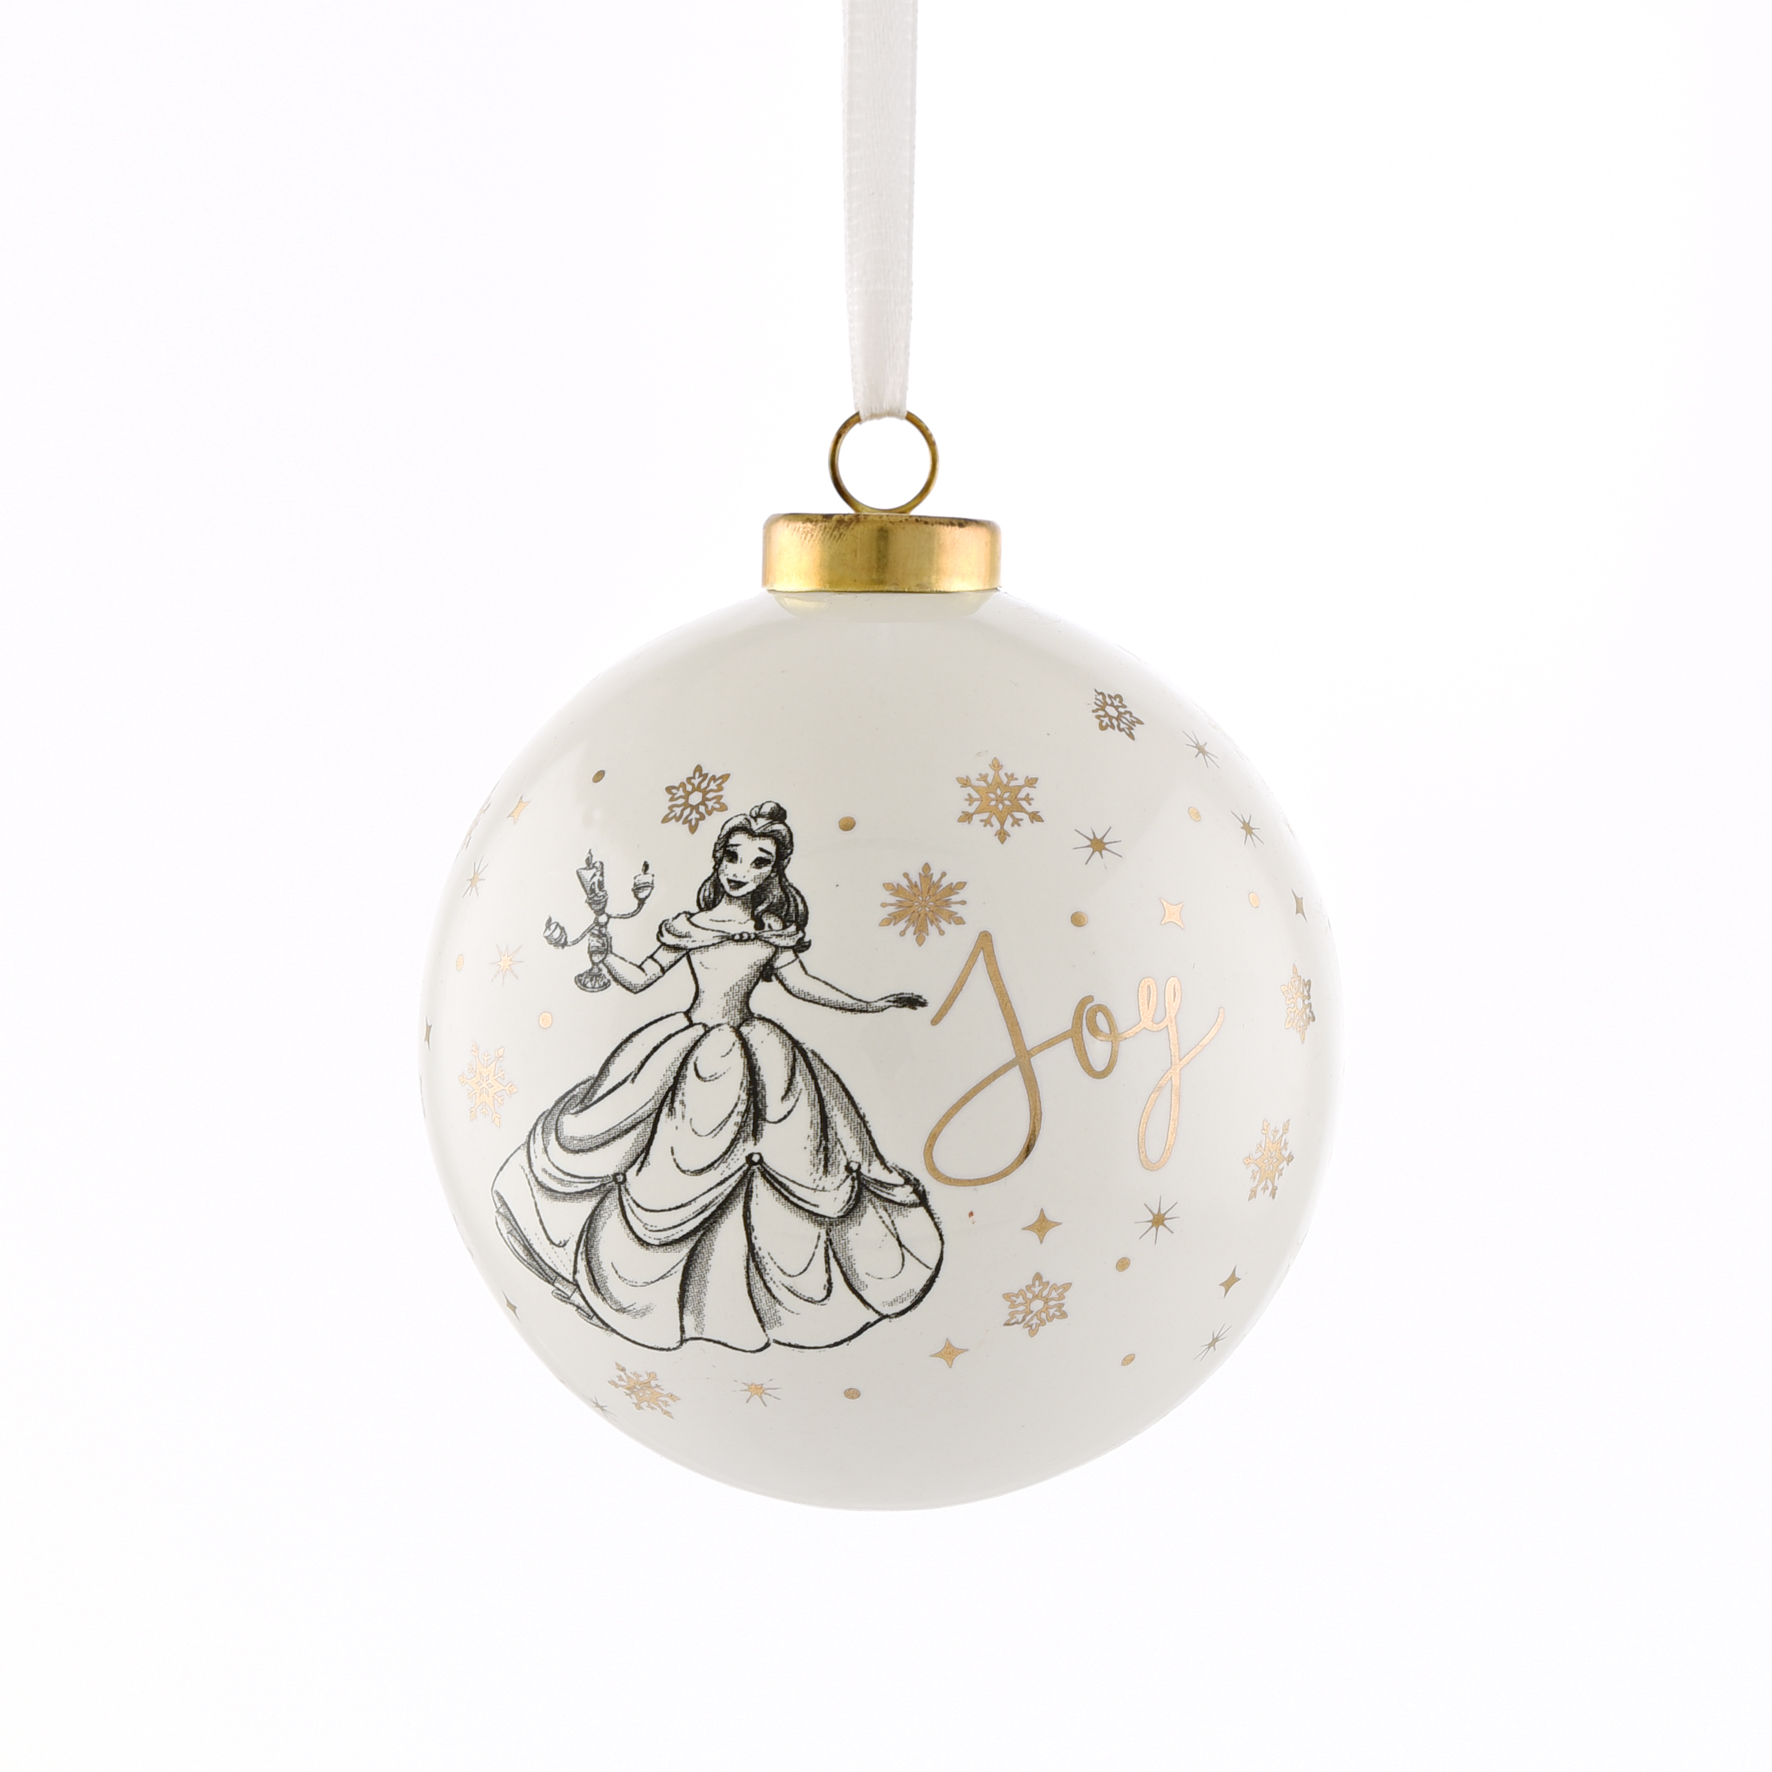 Widdop Ceramic Beauty and the Beast Belle Christmas Bauble